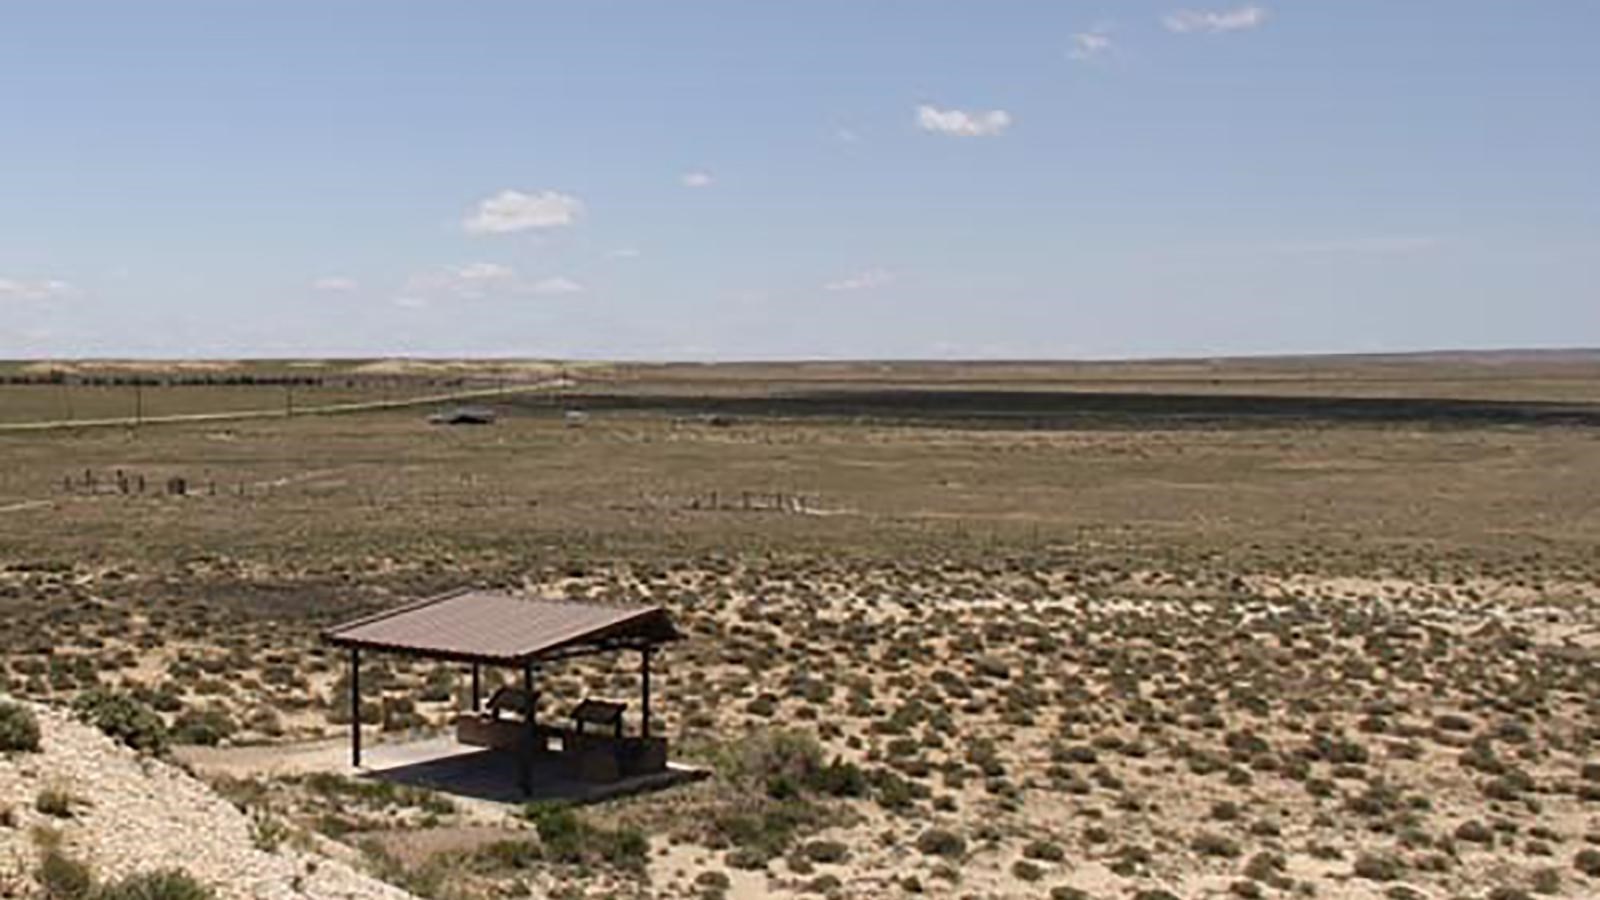 Looking out over a desert dotted with shrubs and grass, with a covered picnic area in the foreground